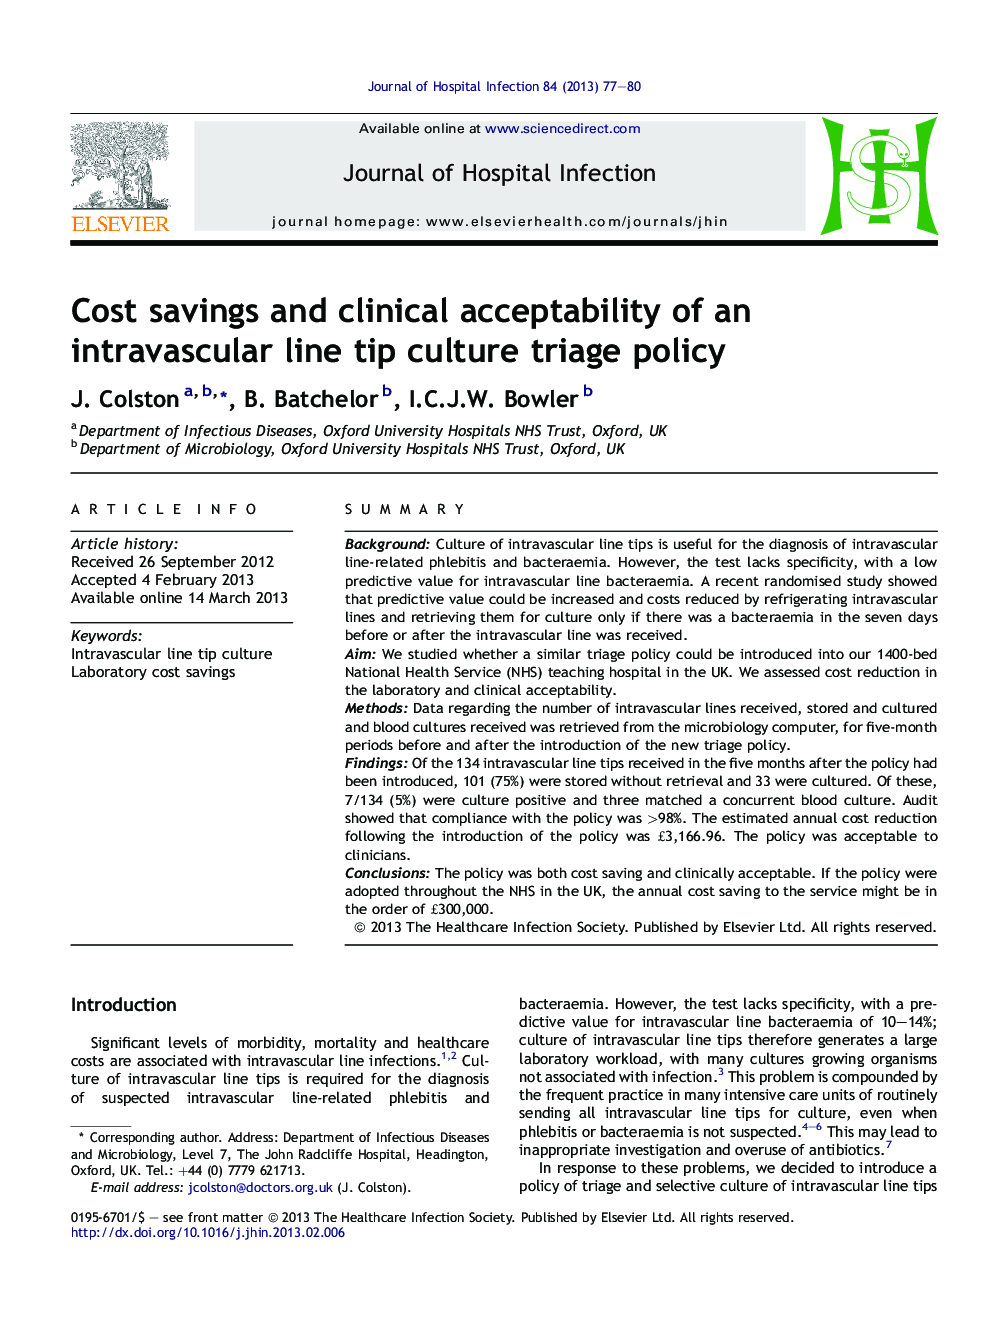 Cost savings and clinical acceptability of an intravascular line tip culture triage policy